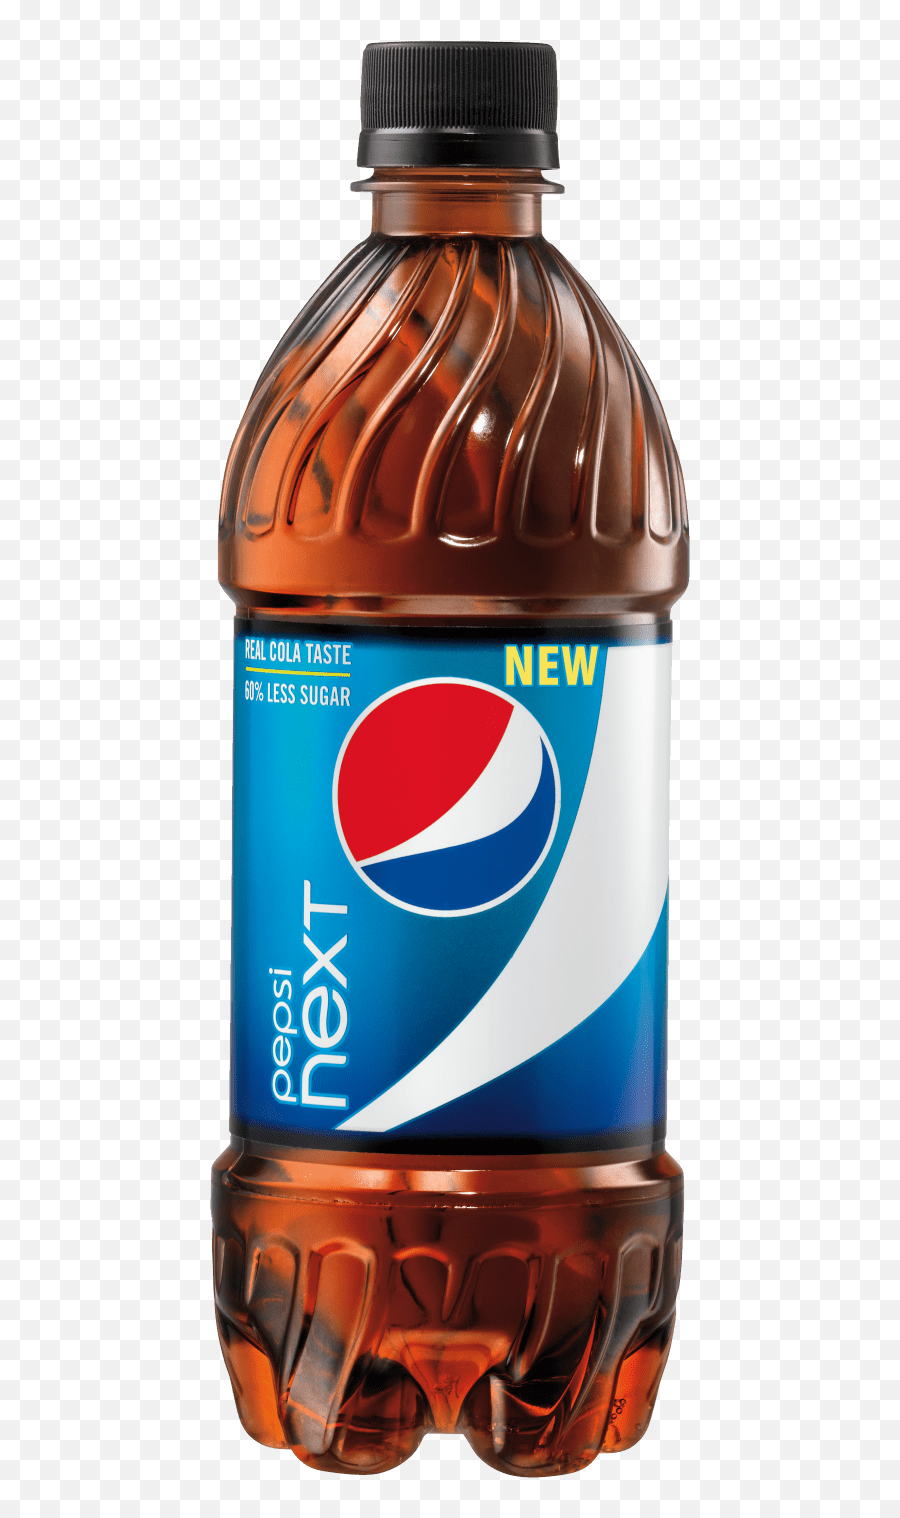 Png Image With Transparent Background - Pepsi Next,Pepsi Can Transparent Background